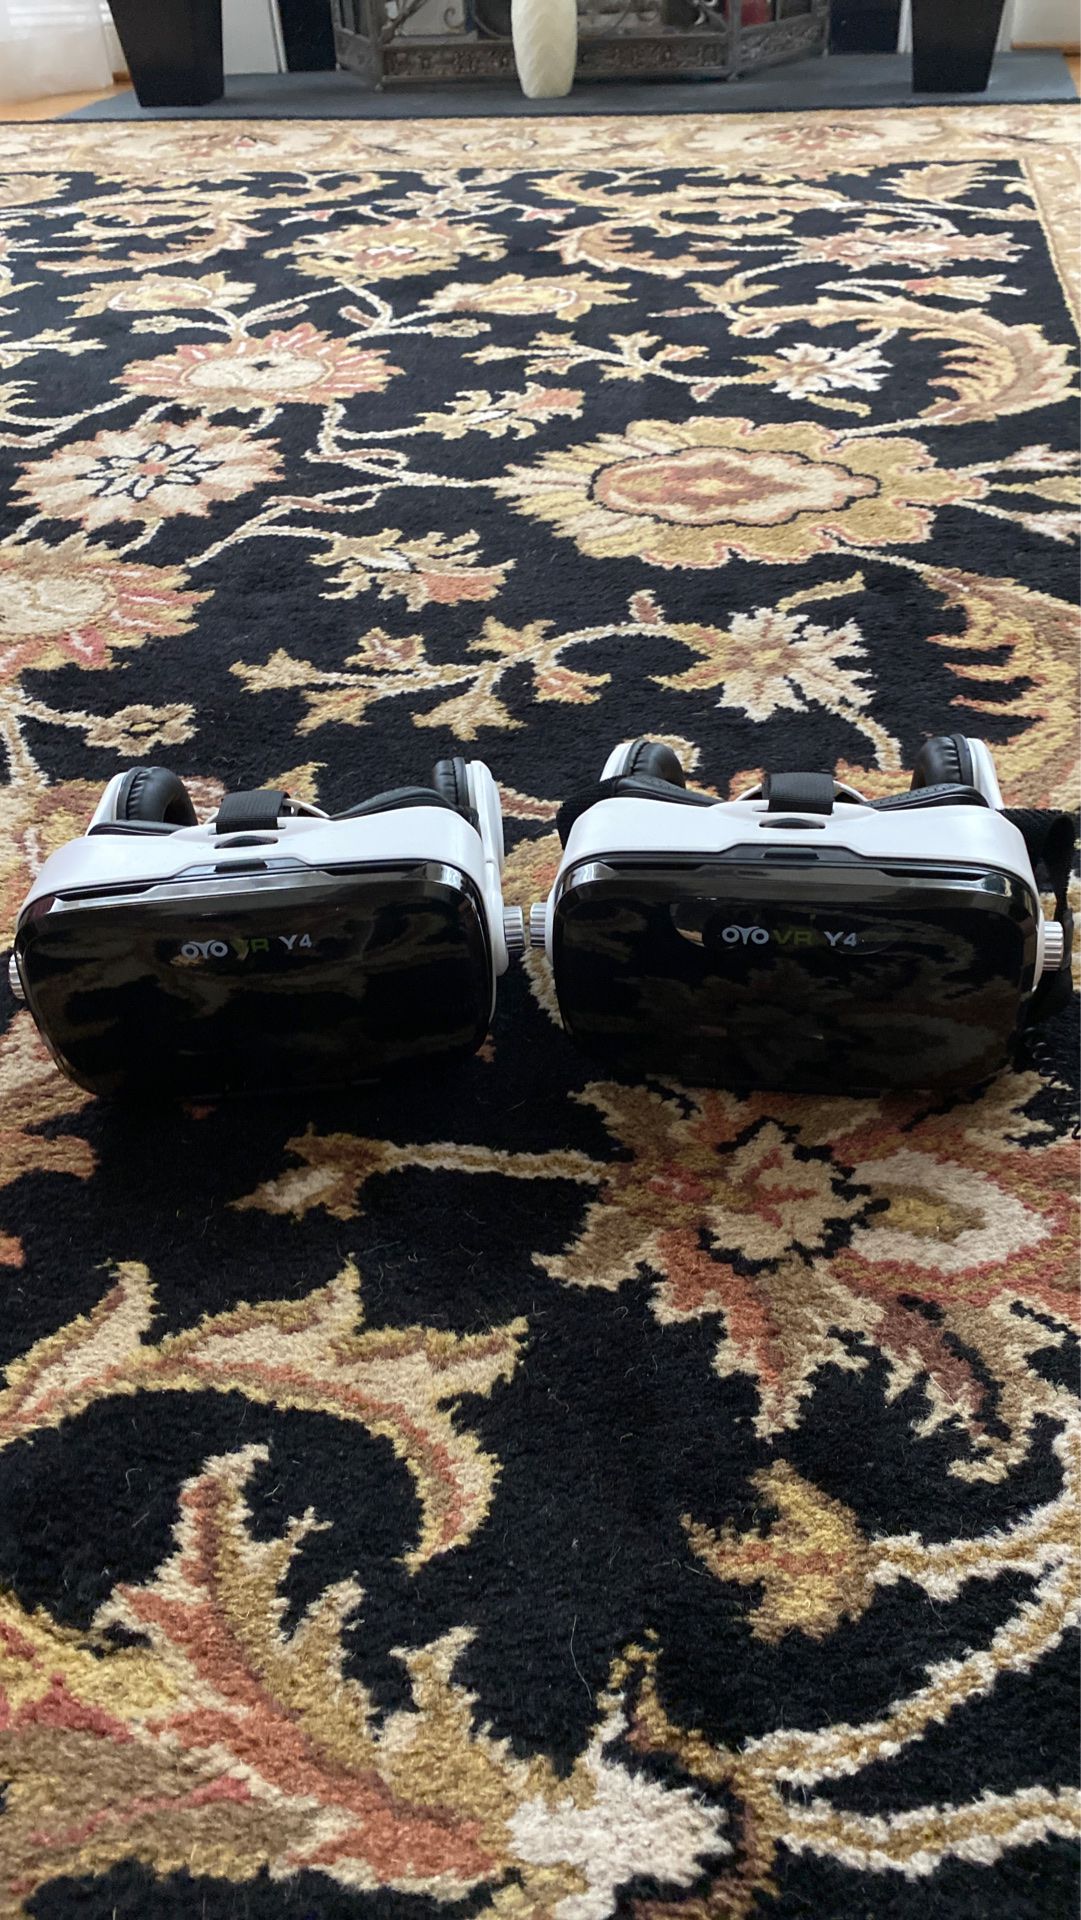 2 VR Goggles Set, Like New, $60 Value